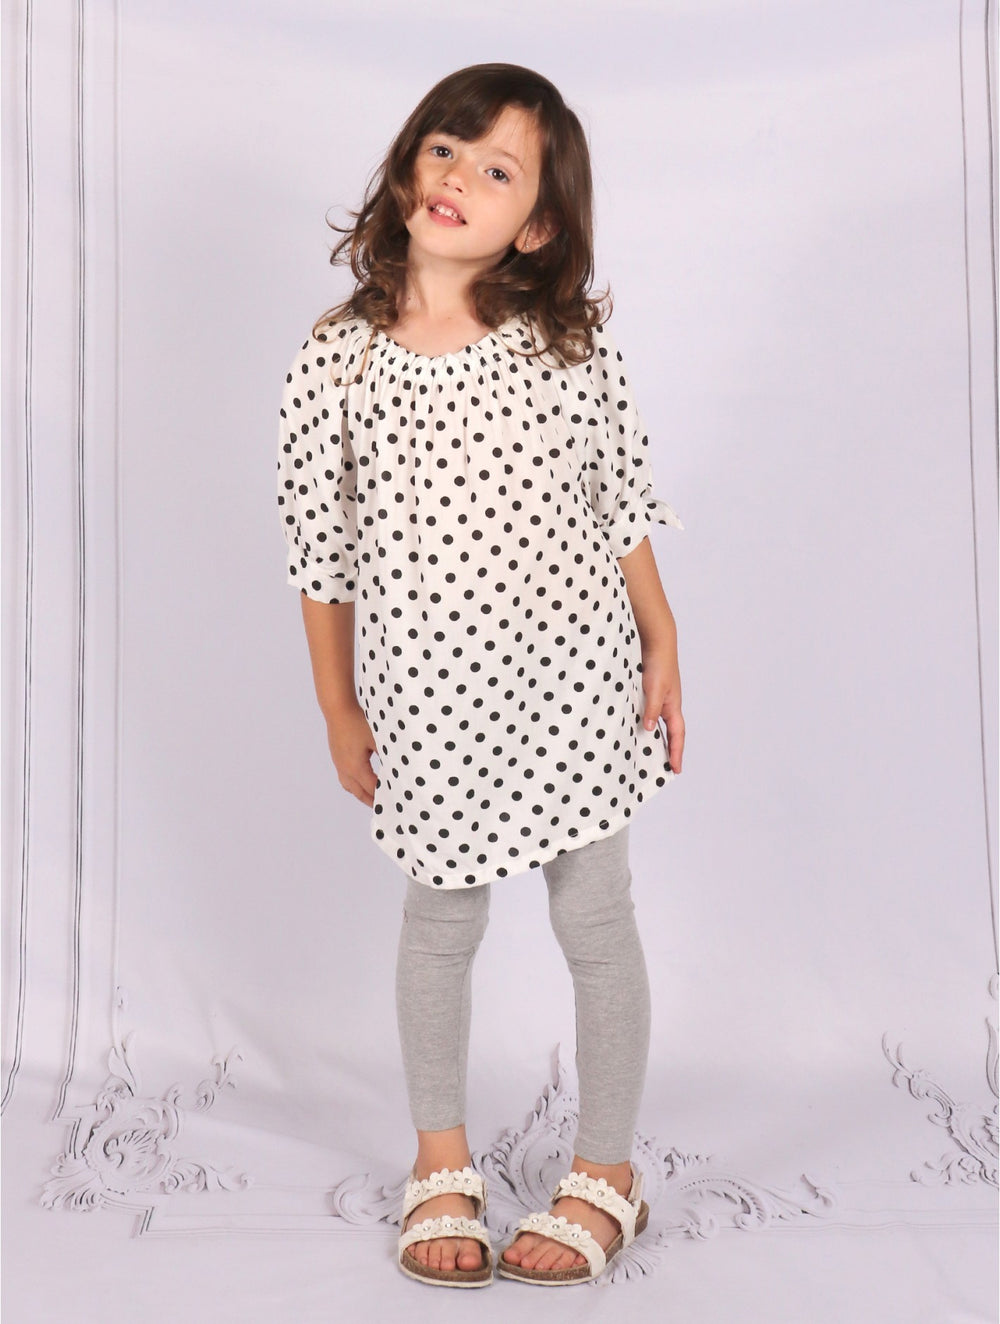 Grand-Kid's Off-Shoulder Printed Fashion Top-White Polka Dots (CL15106M)